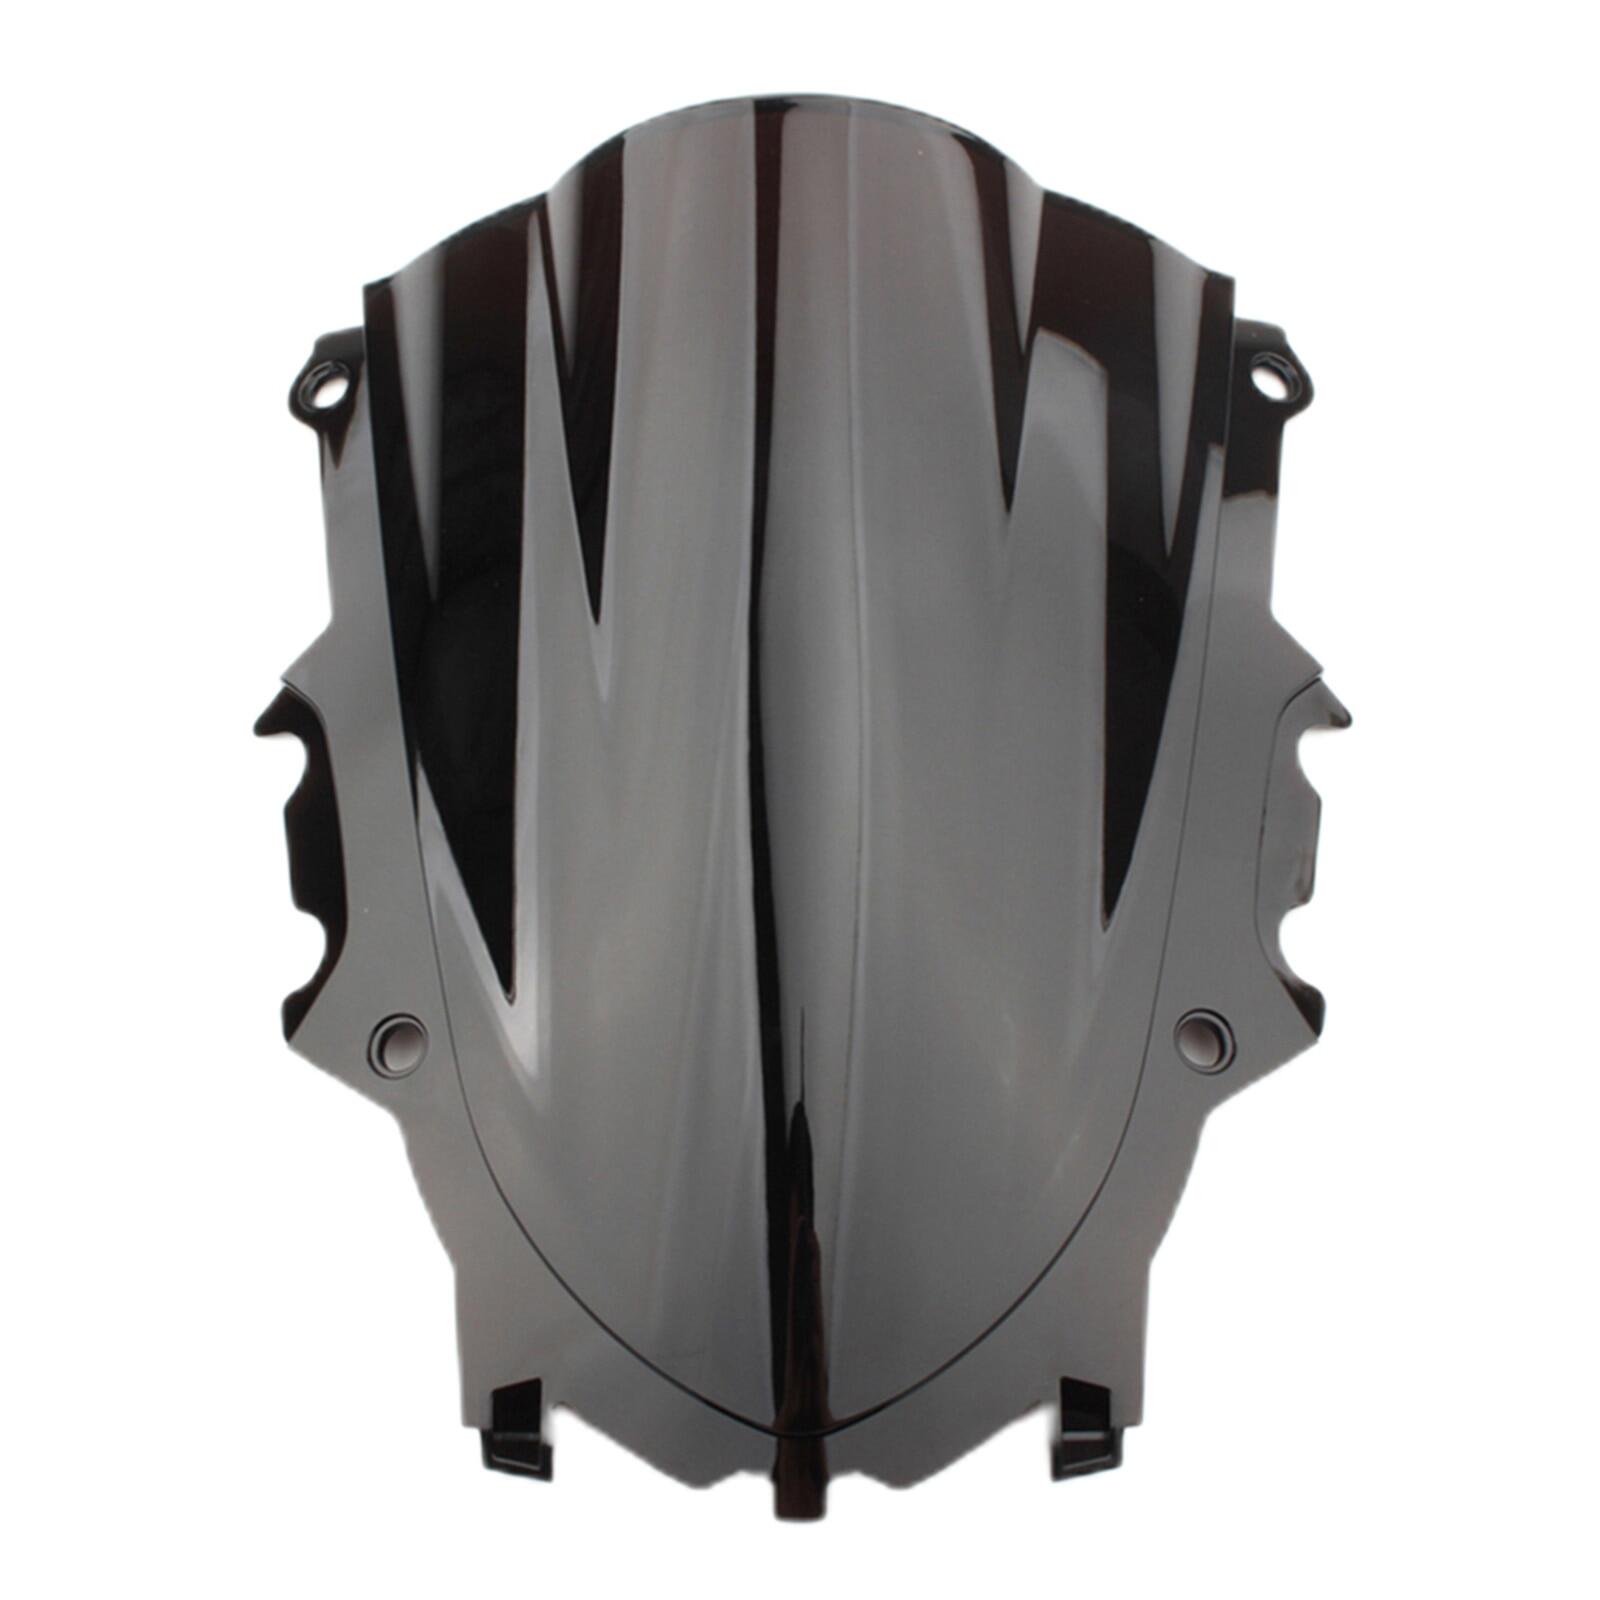 Motorcycle Wind Shield Windscreen Wind ors for Yamaha YZF R25 R3 Front Windshield Front PC Windshield Wind Deflector